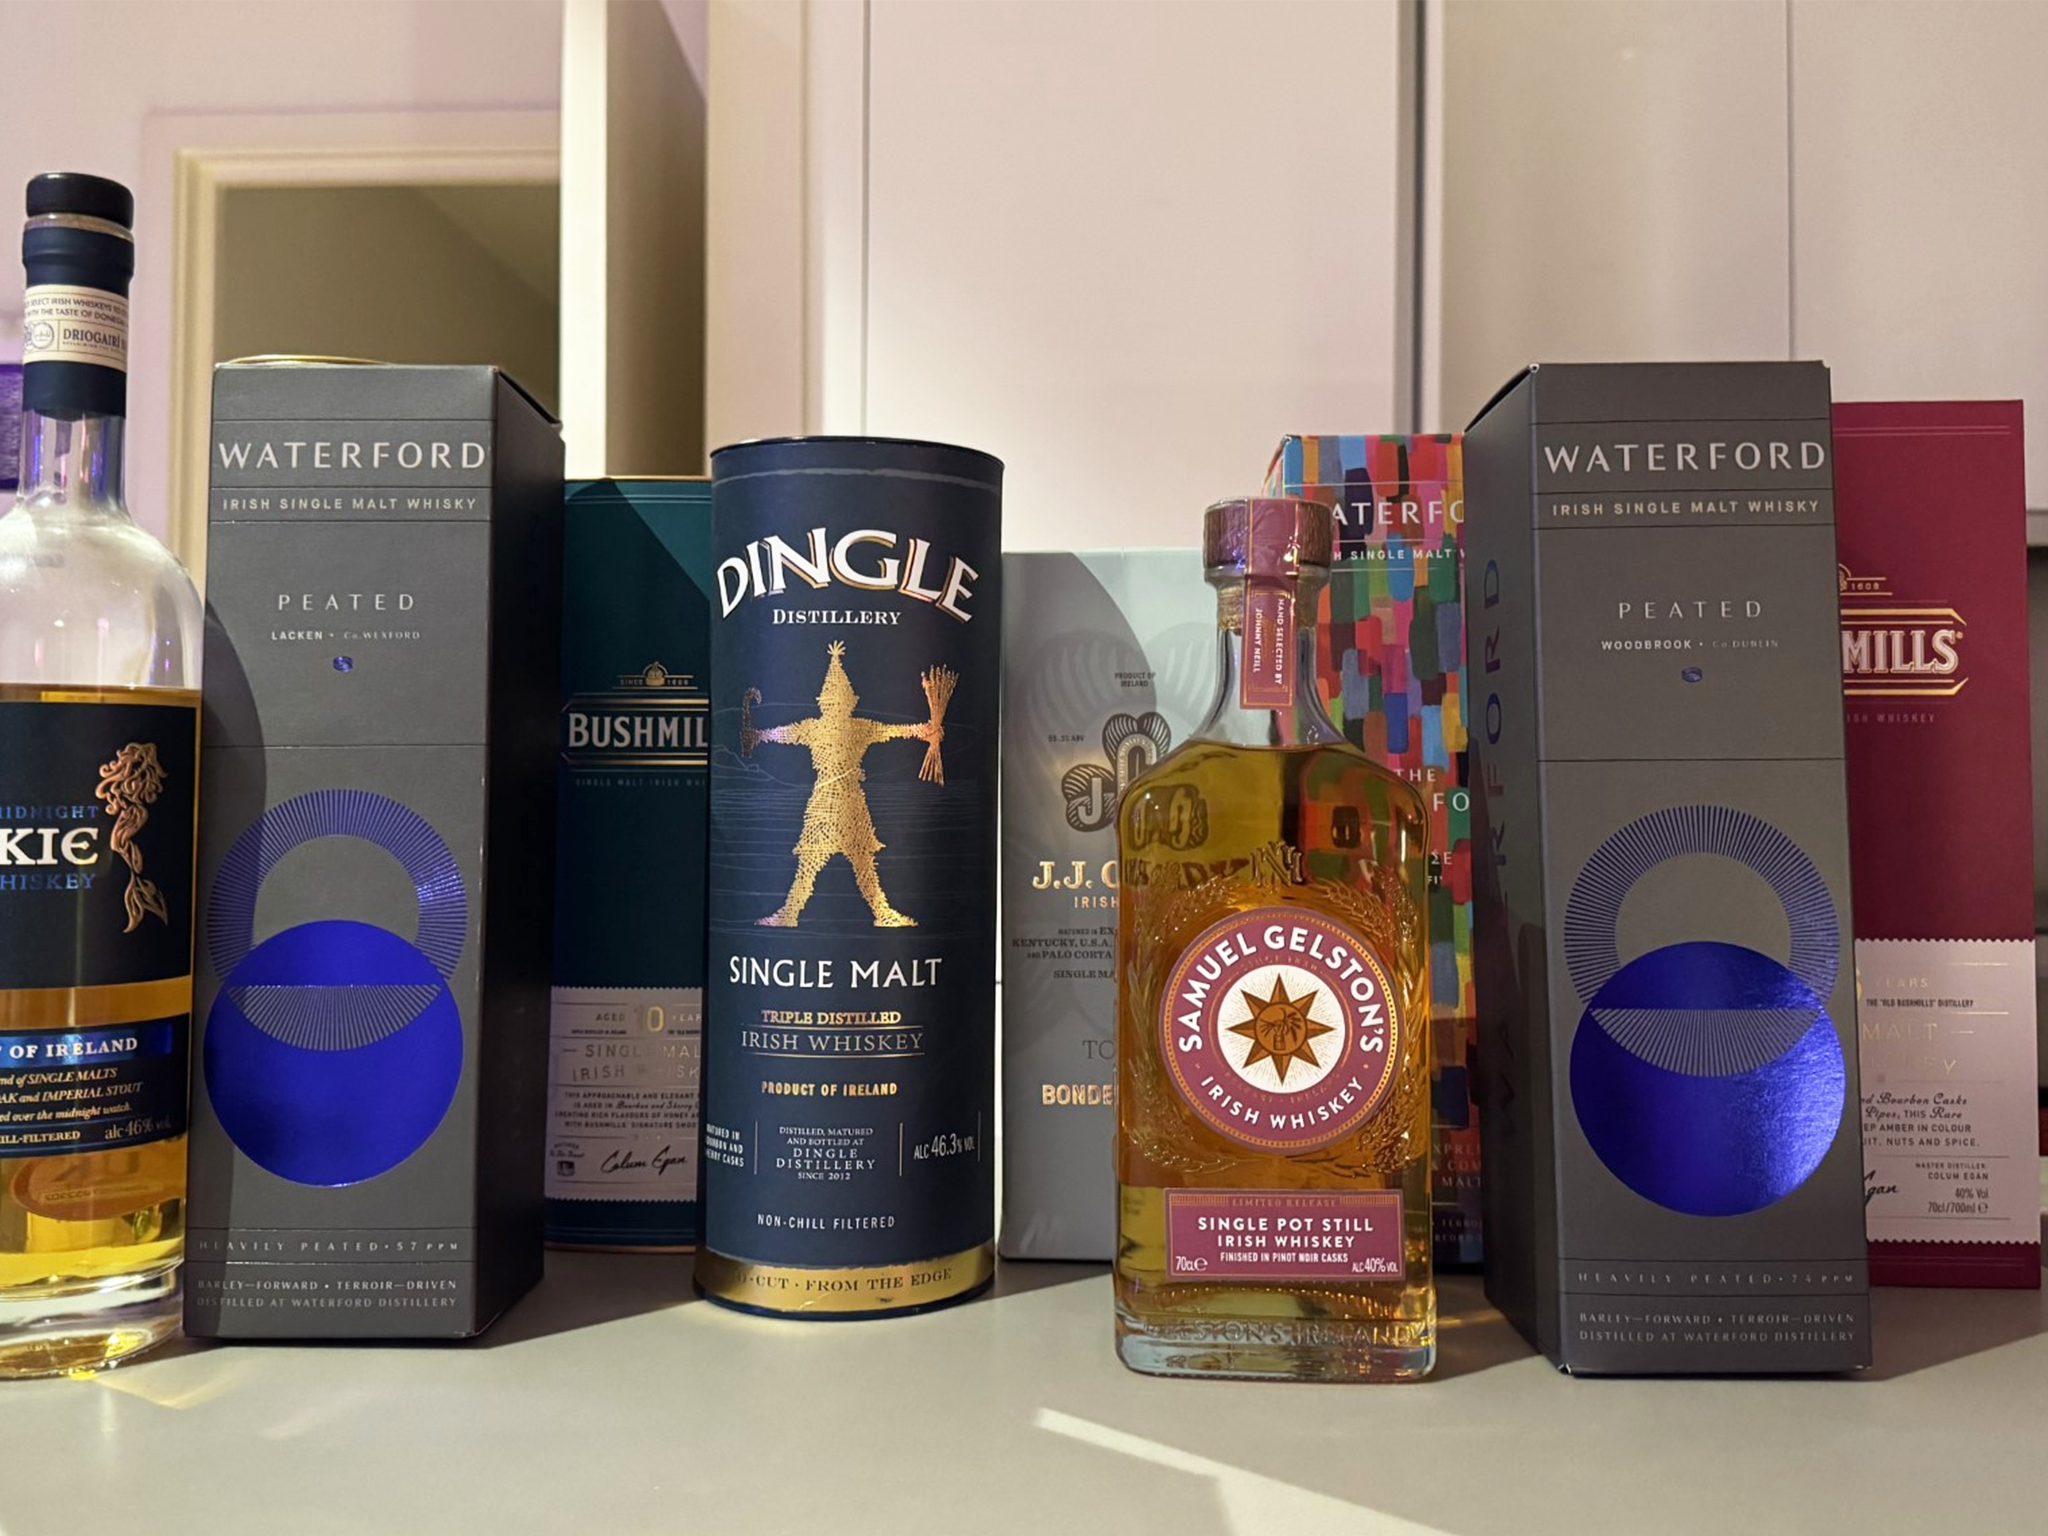 A selection of the best Irish whiskeys that we taste tested